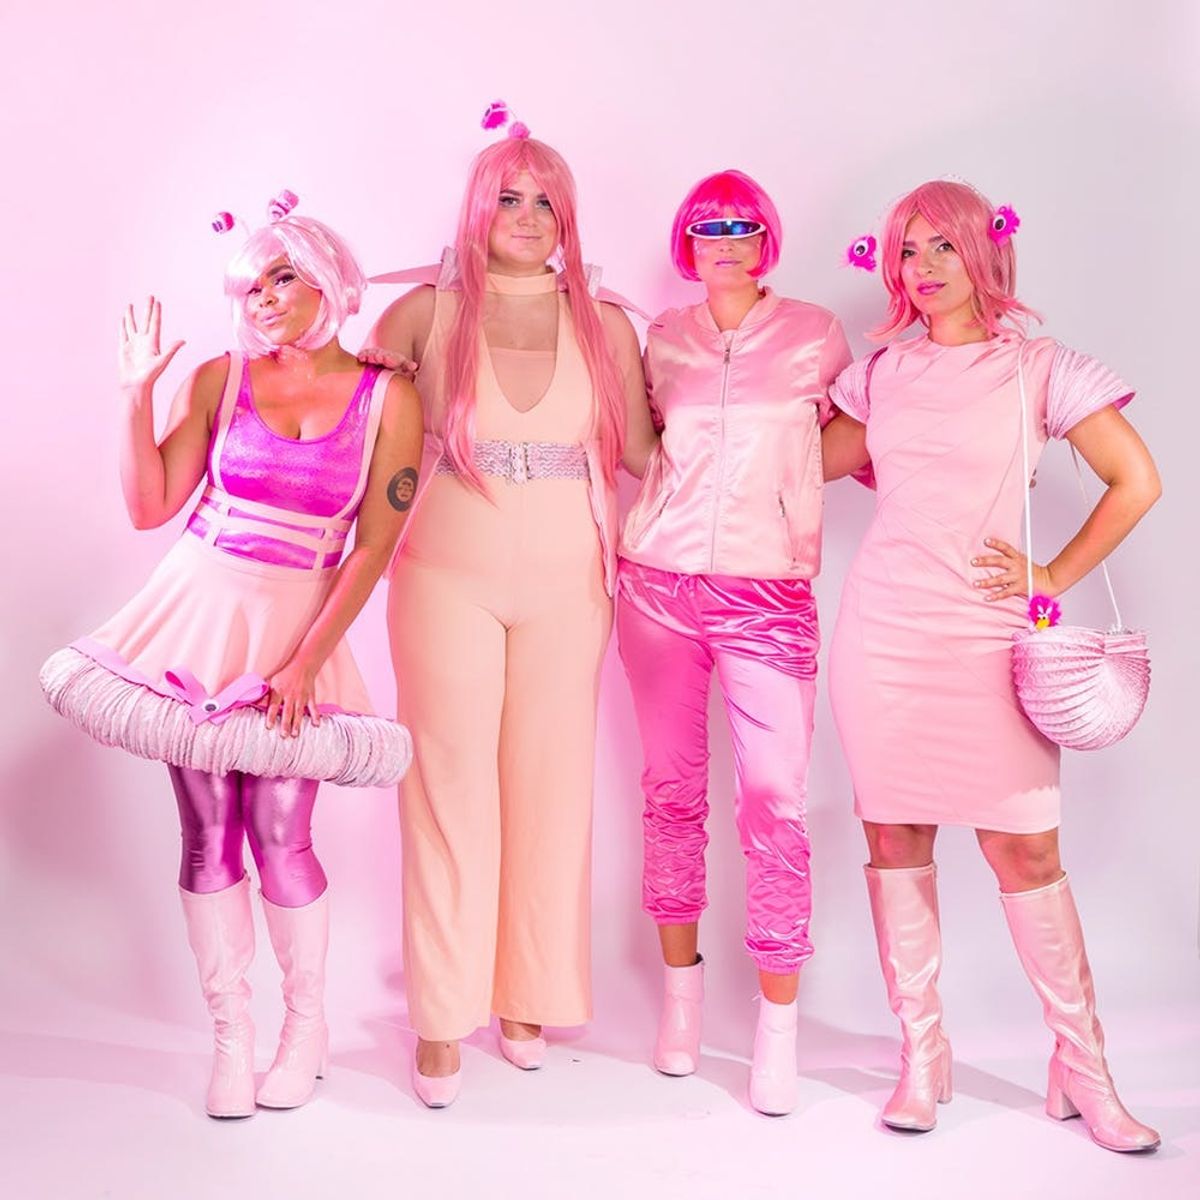 Celebrate Halloween 2017 With This Futuristic Millennial Pink Group Costume